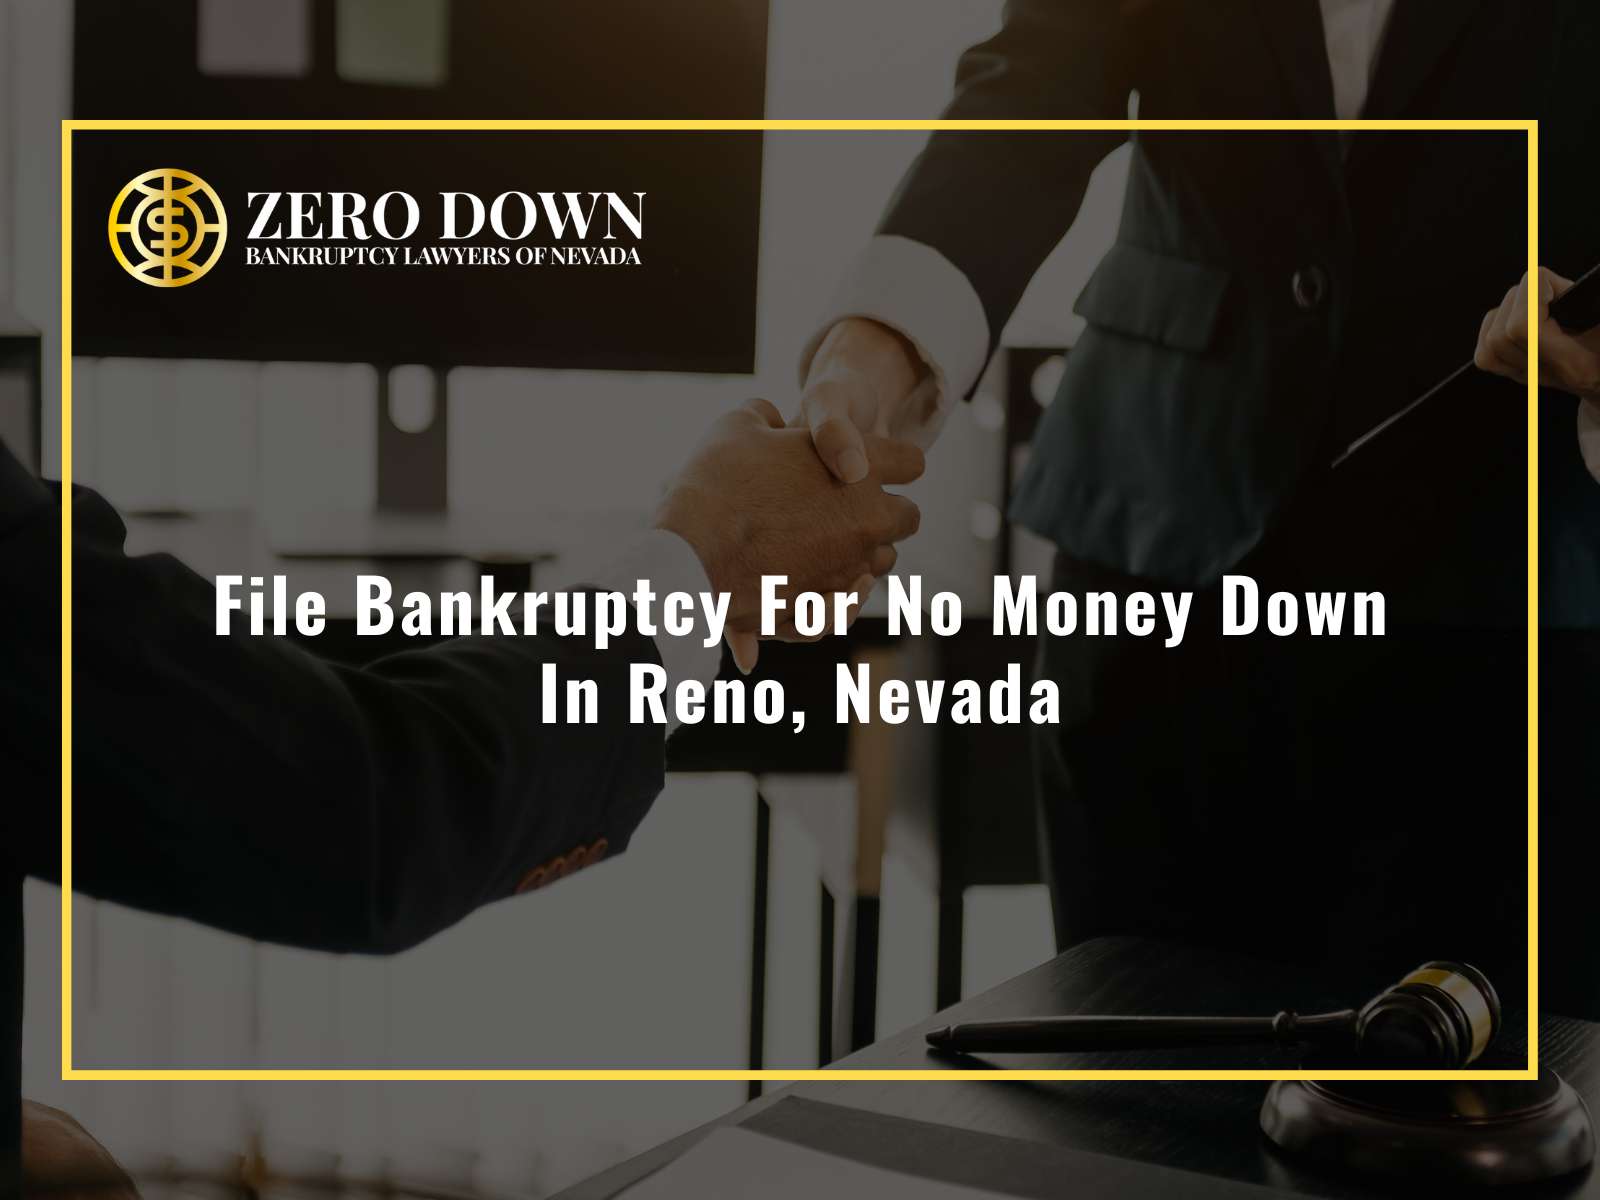 File Bankruptcy For No Money Down In Reno, Nevada